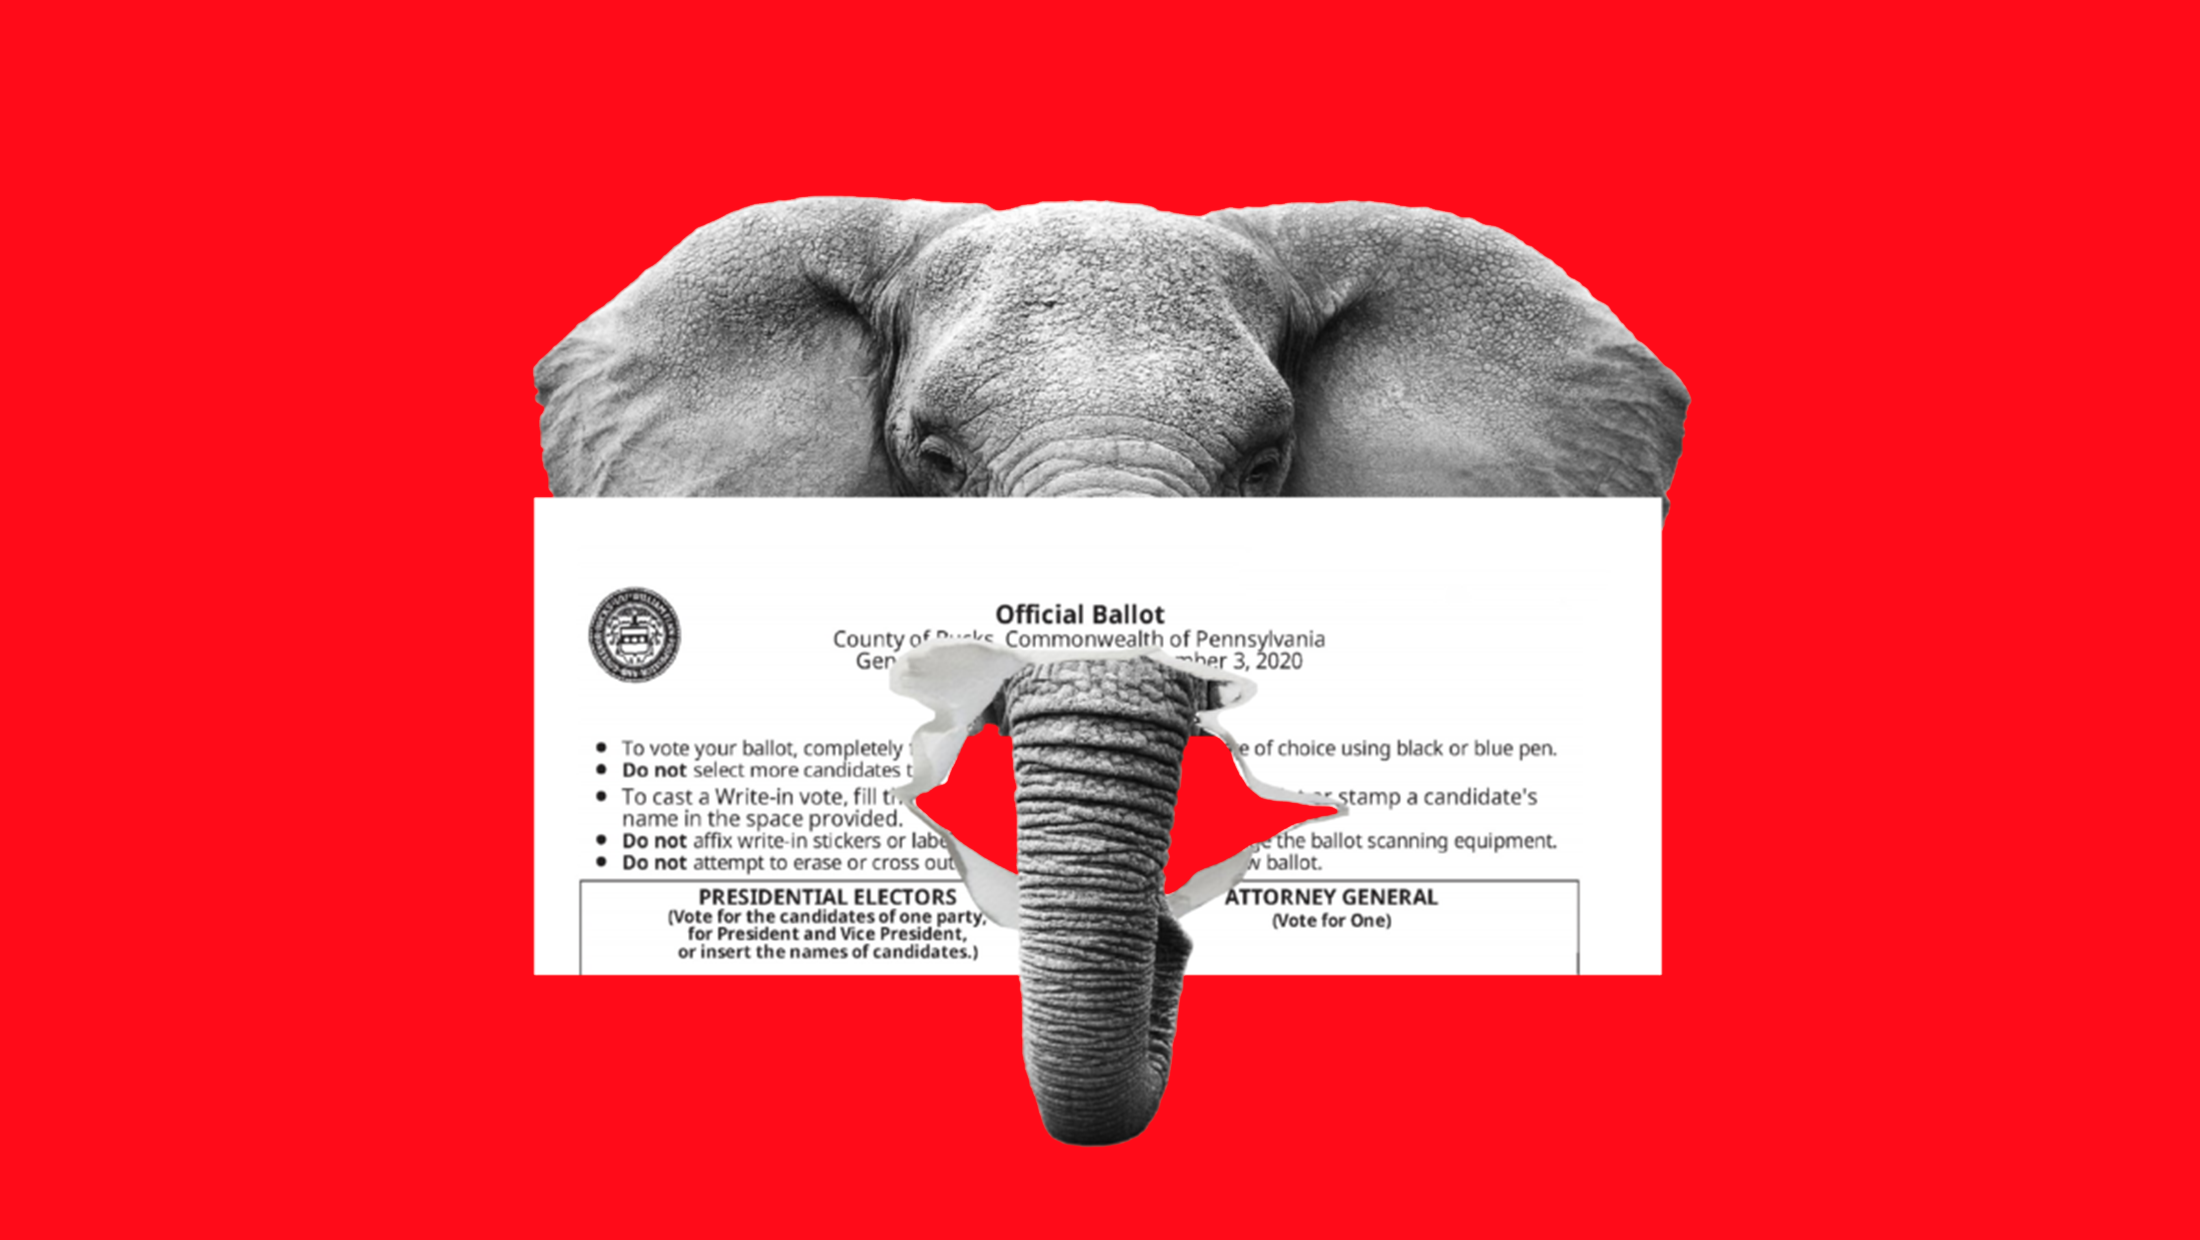 The face of an elephant with his trunk ripping through a Pennsylvania general election ballot, leaving a gaping hole in the ballot